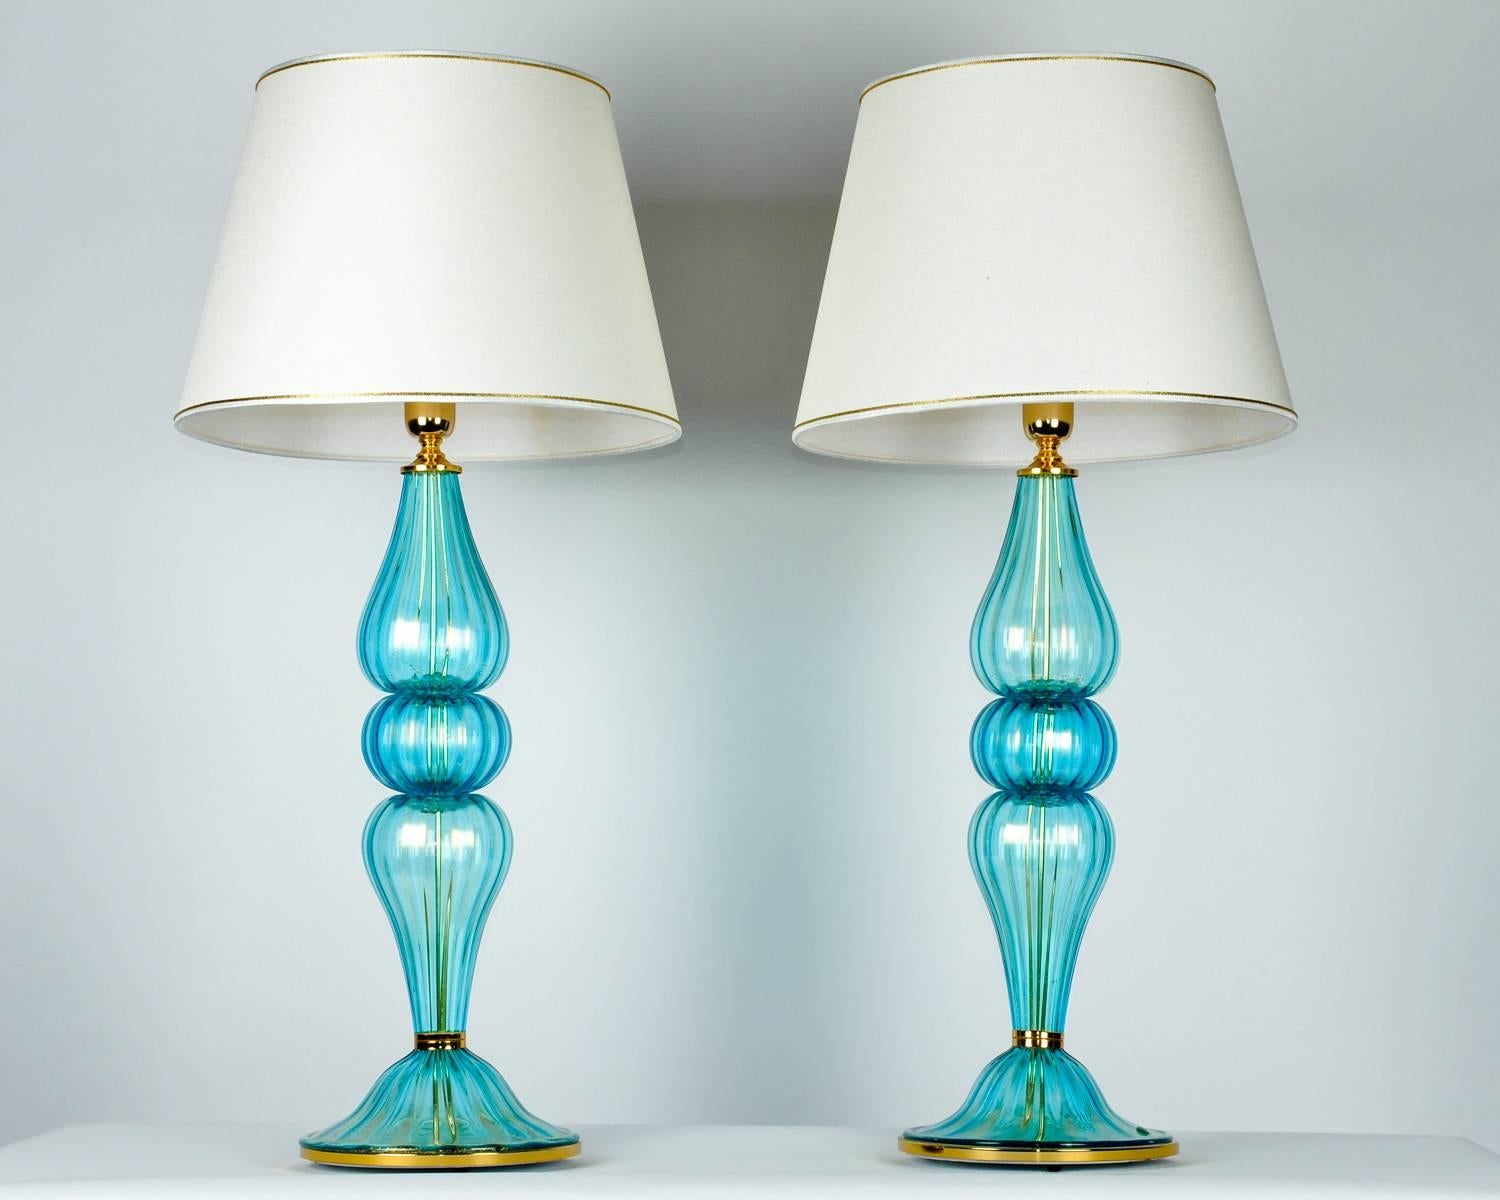 Gold flecks design details with brass base Murano glass pair table lamps. Each lamp is in excellent working condition and has been recently rewired for US use. Each one measure 34 inches high x 5 inches body diameter x 9 inches base diameter. These